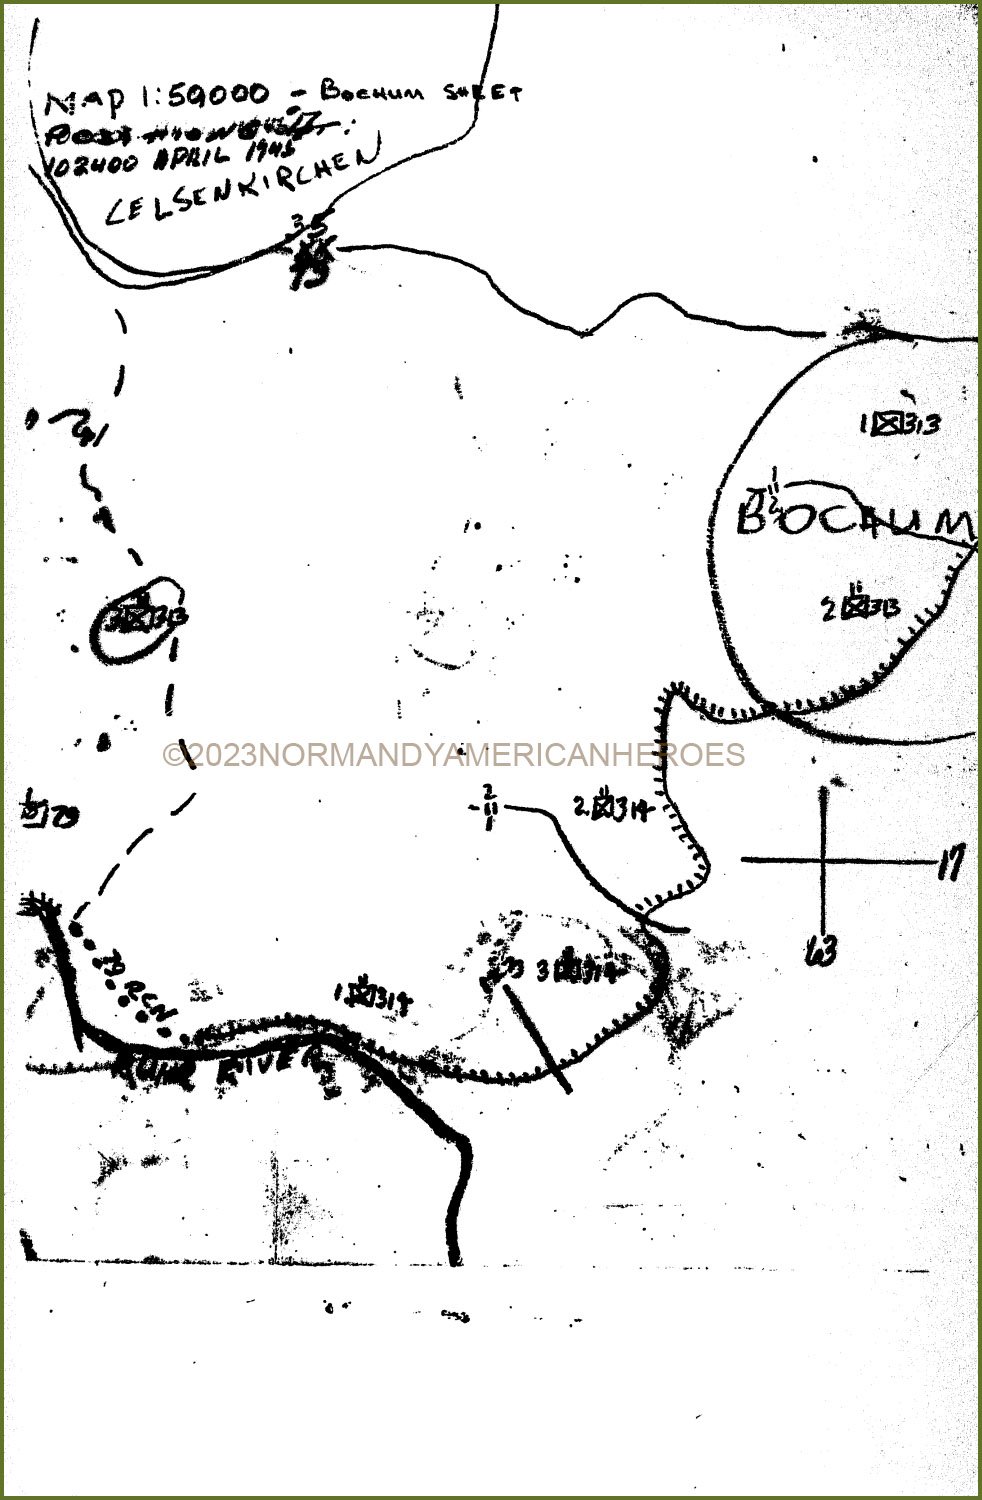 Positions Map Infantry Division (Bochum)